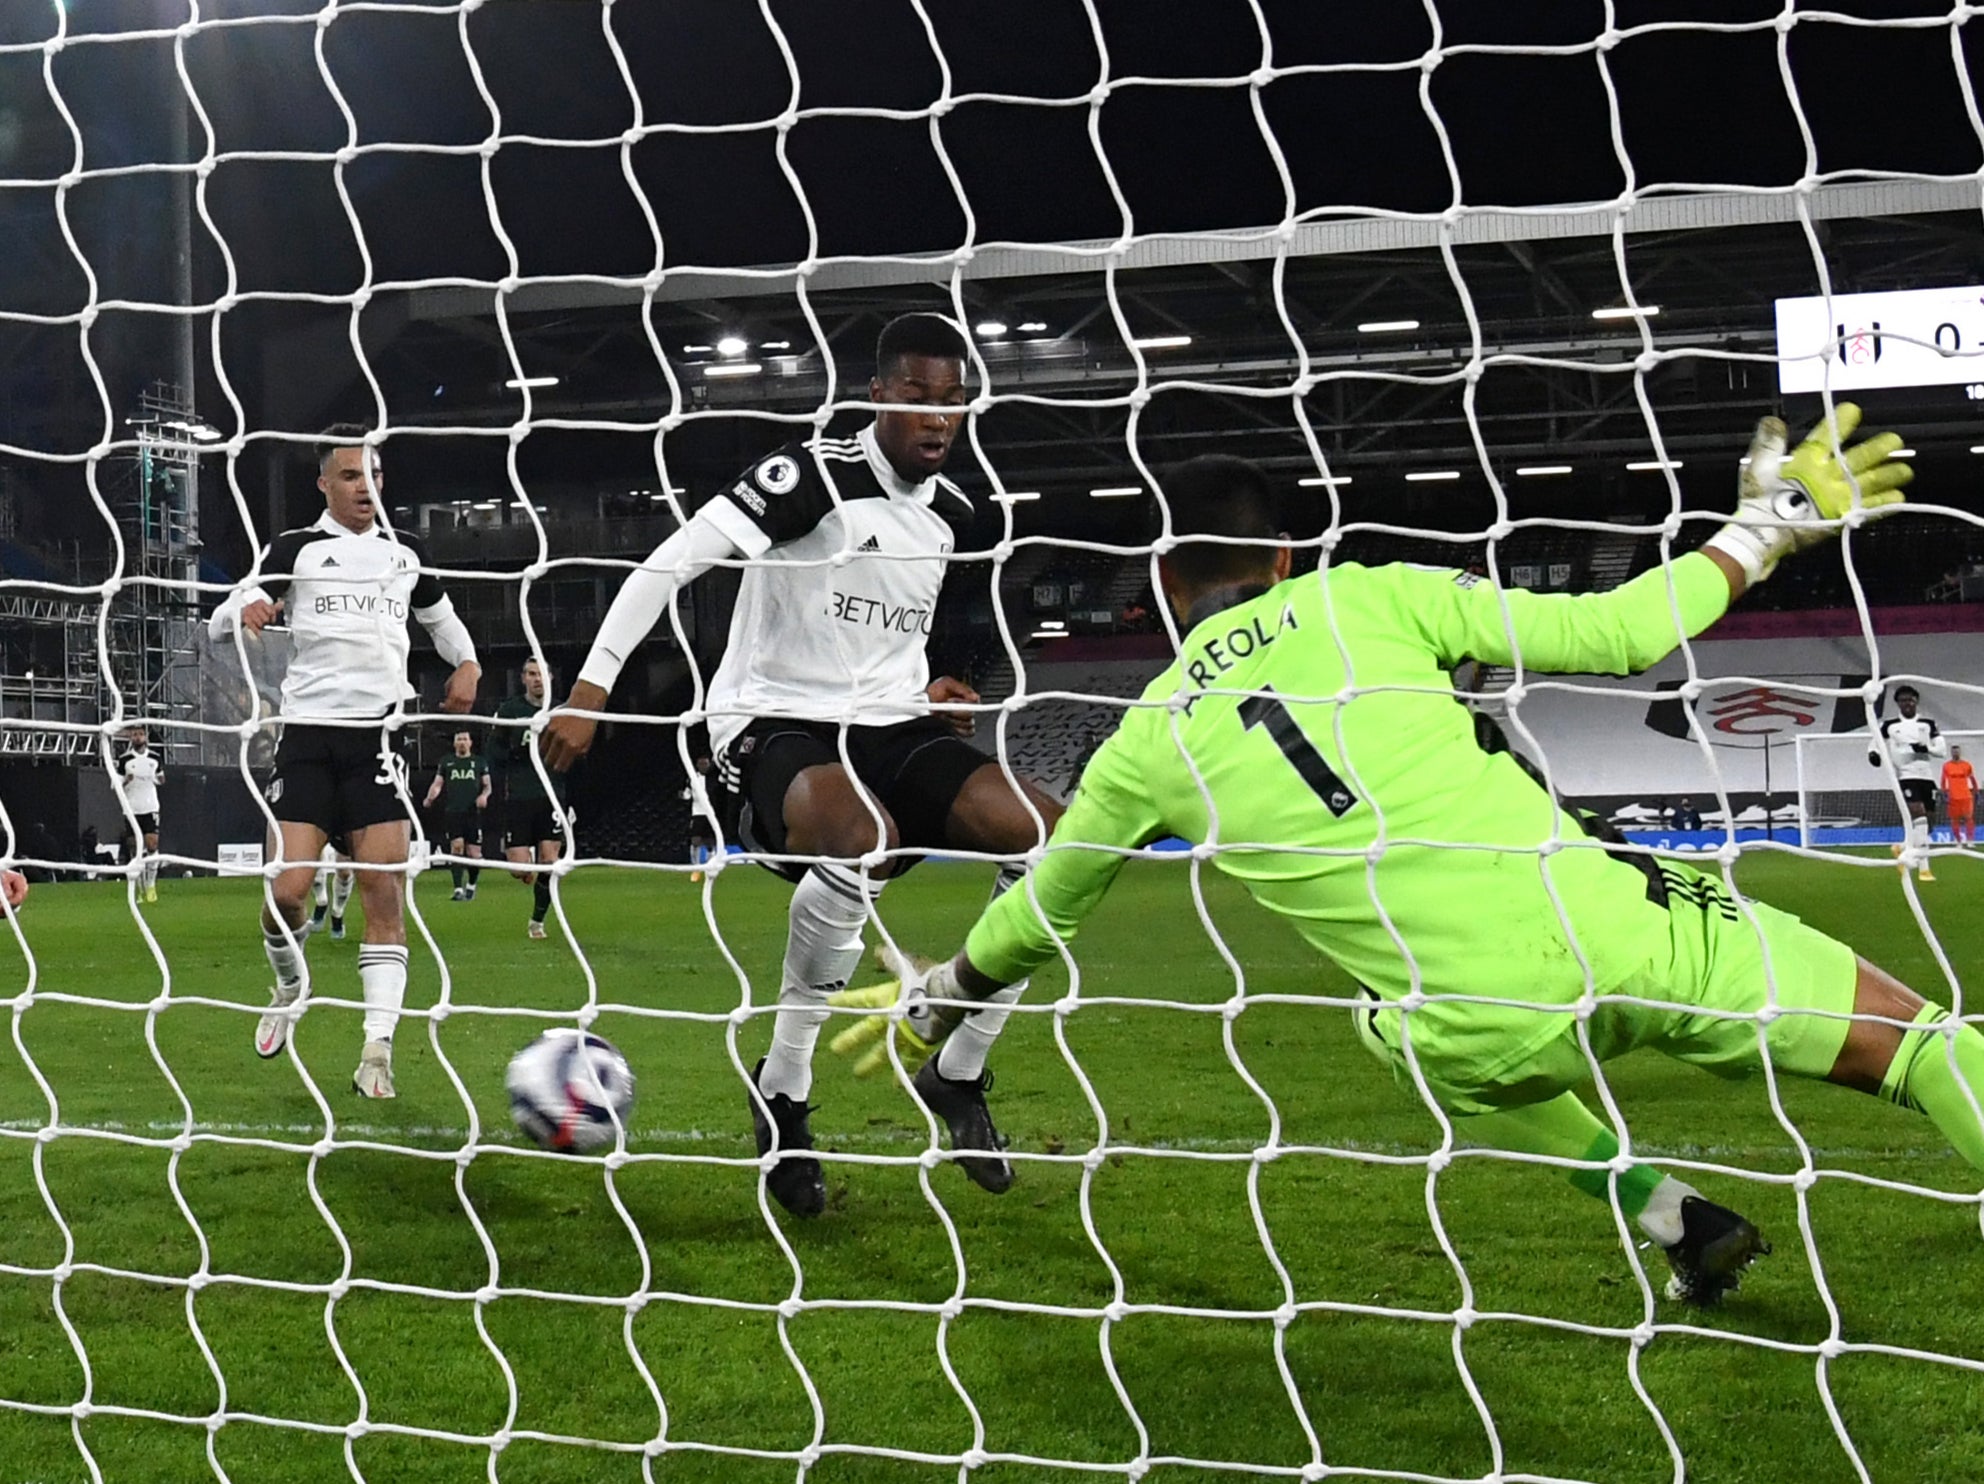 Fulham’s Tosin Adarabioyo turns the ball into his own net